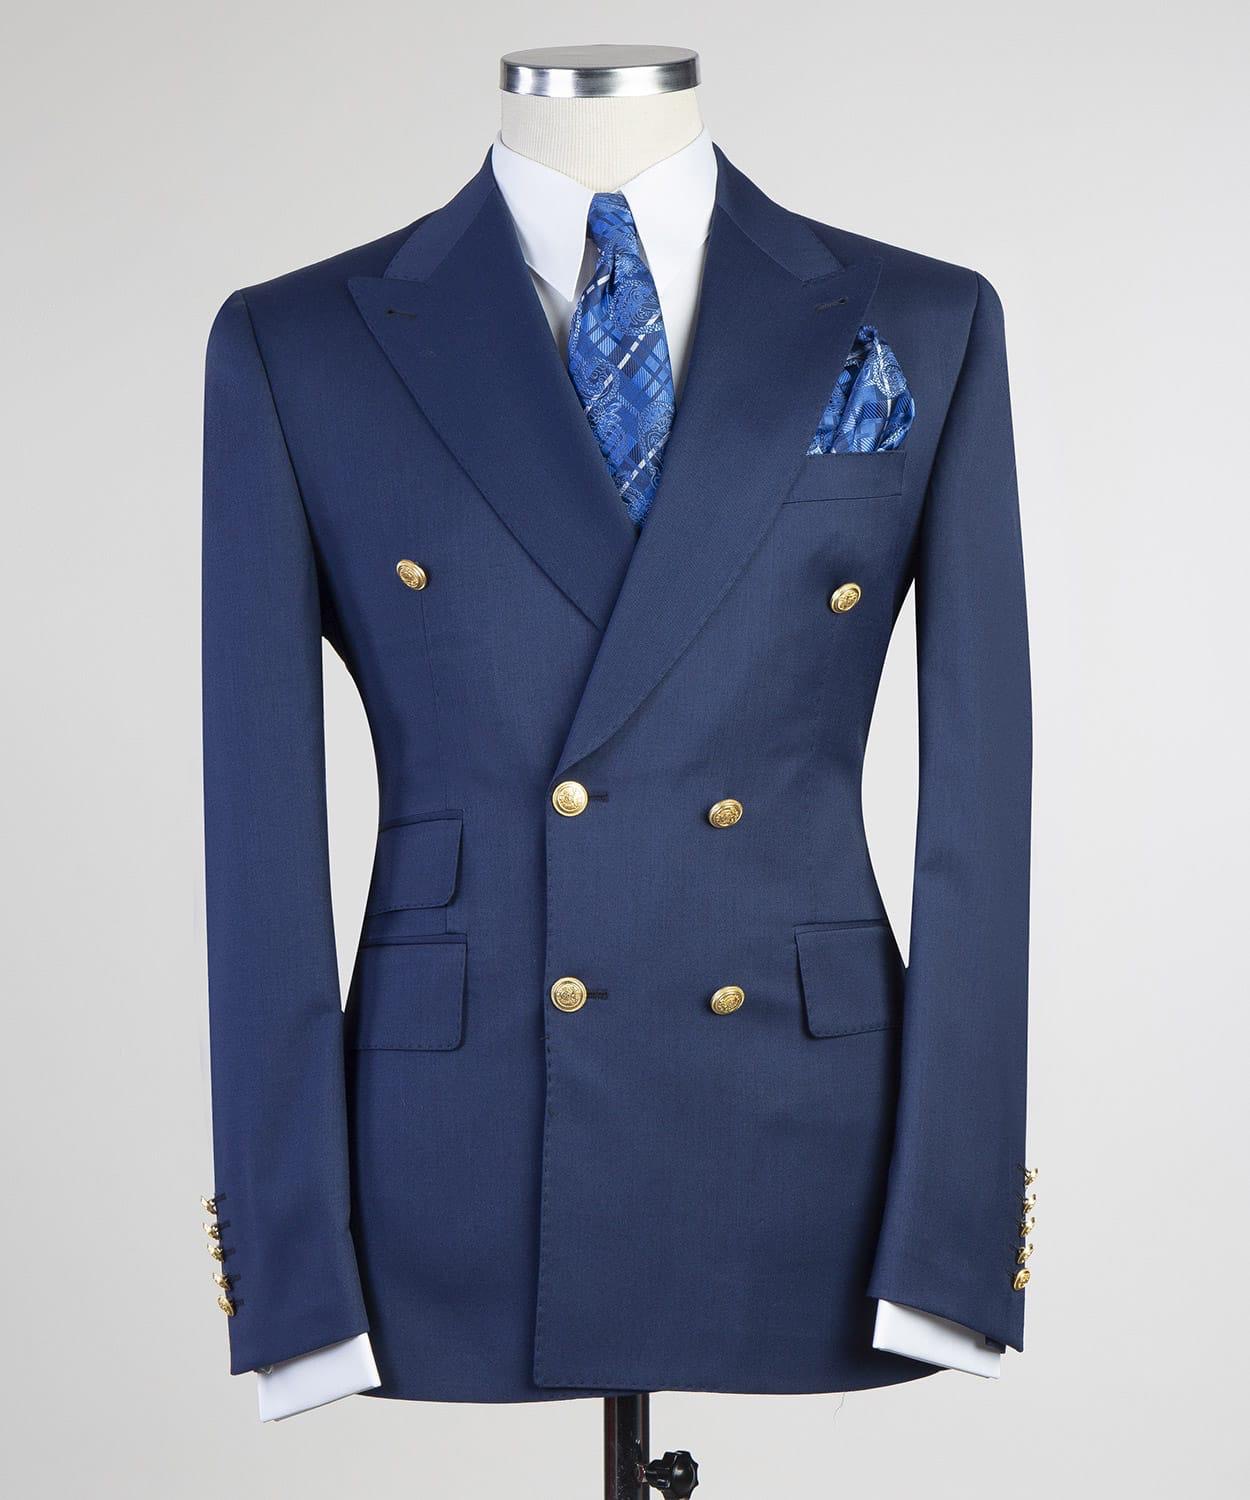 Fashuné Classic Double Breasted Blue Suit - FASHUNE